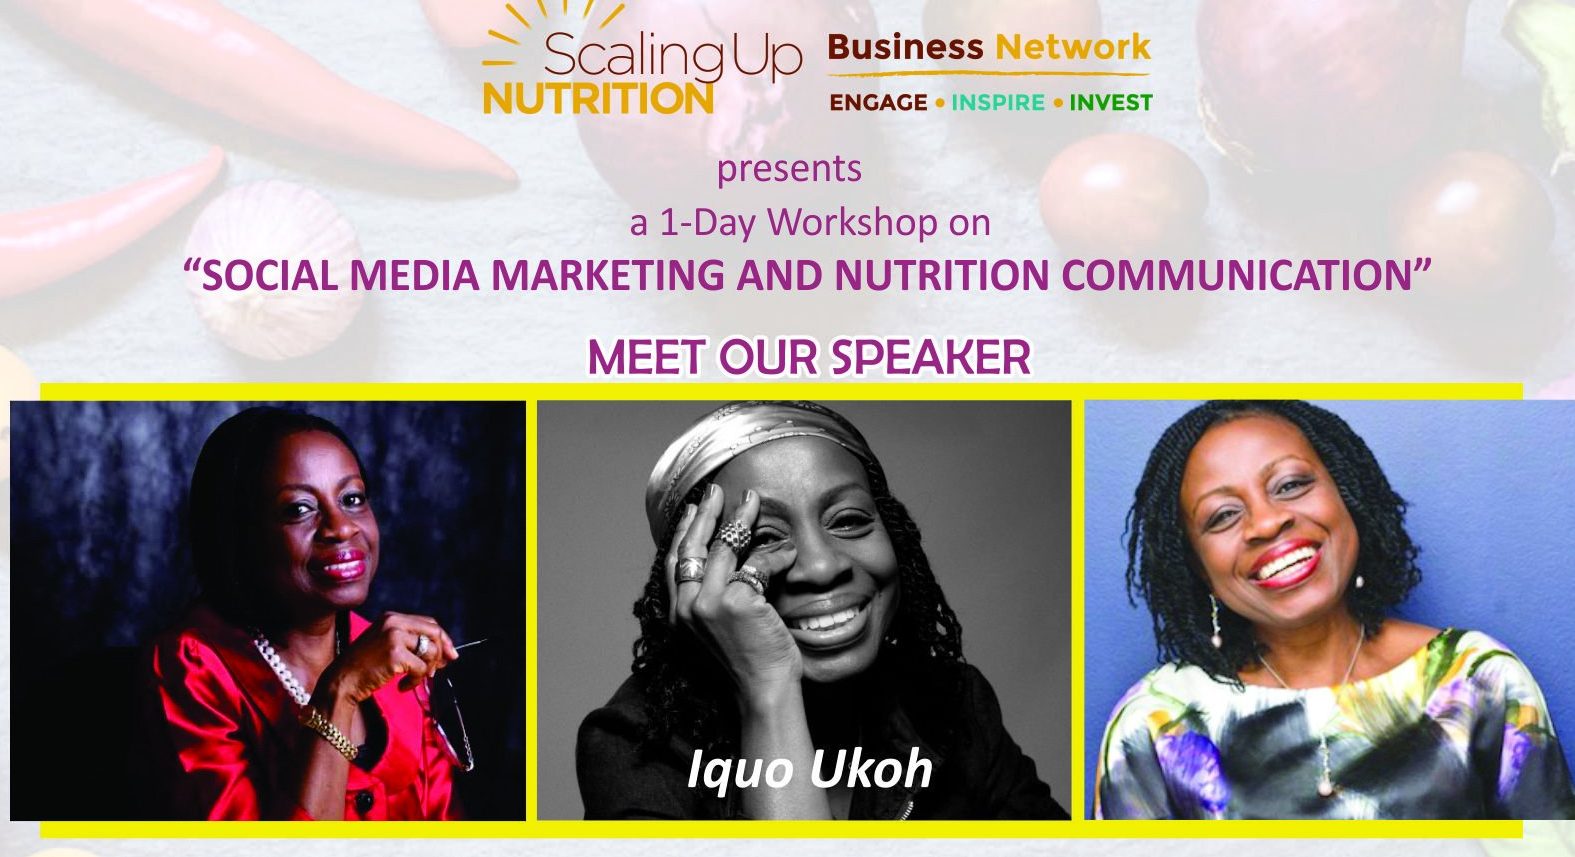 Nigerian businesses come together to learn about nutrition communication and social media marketing